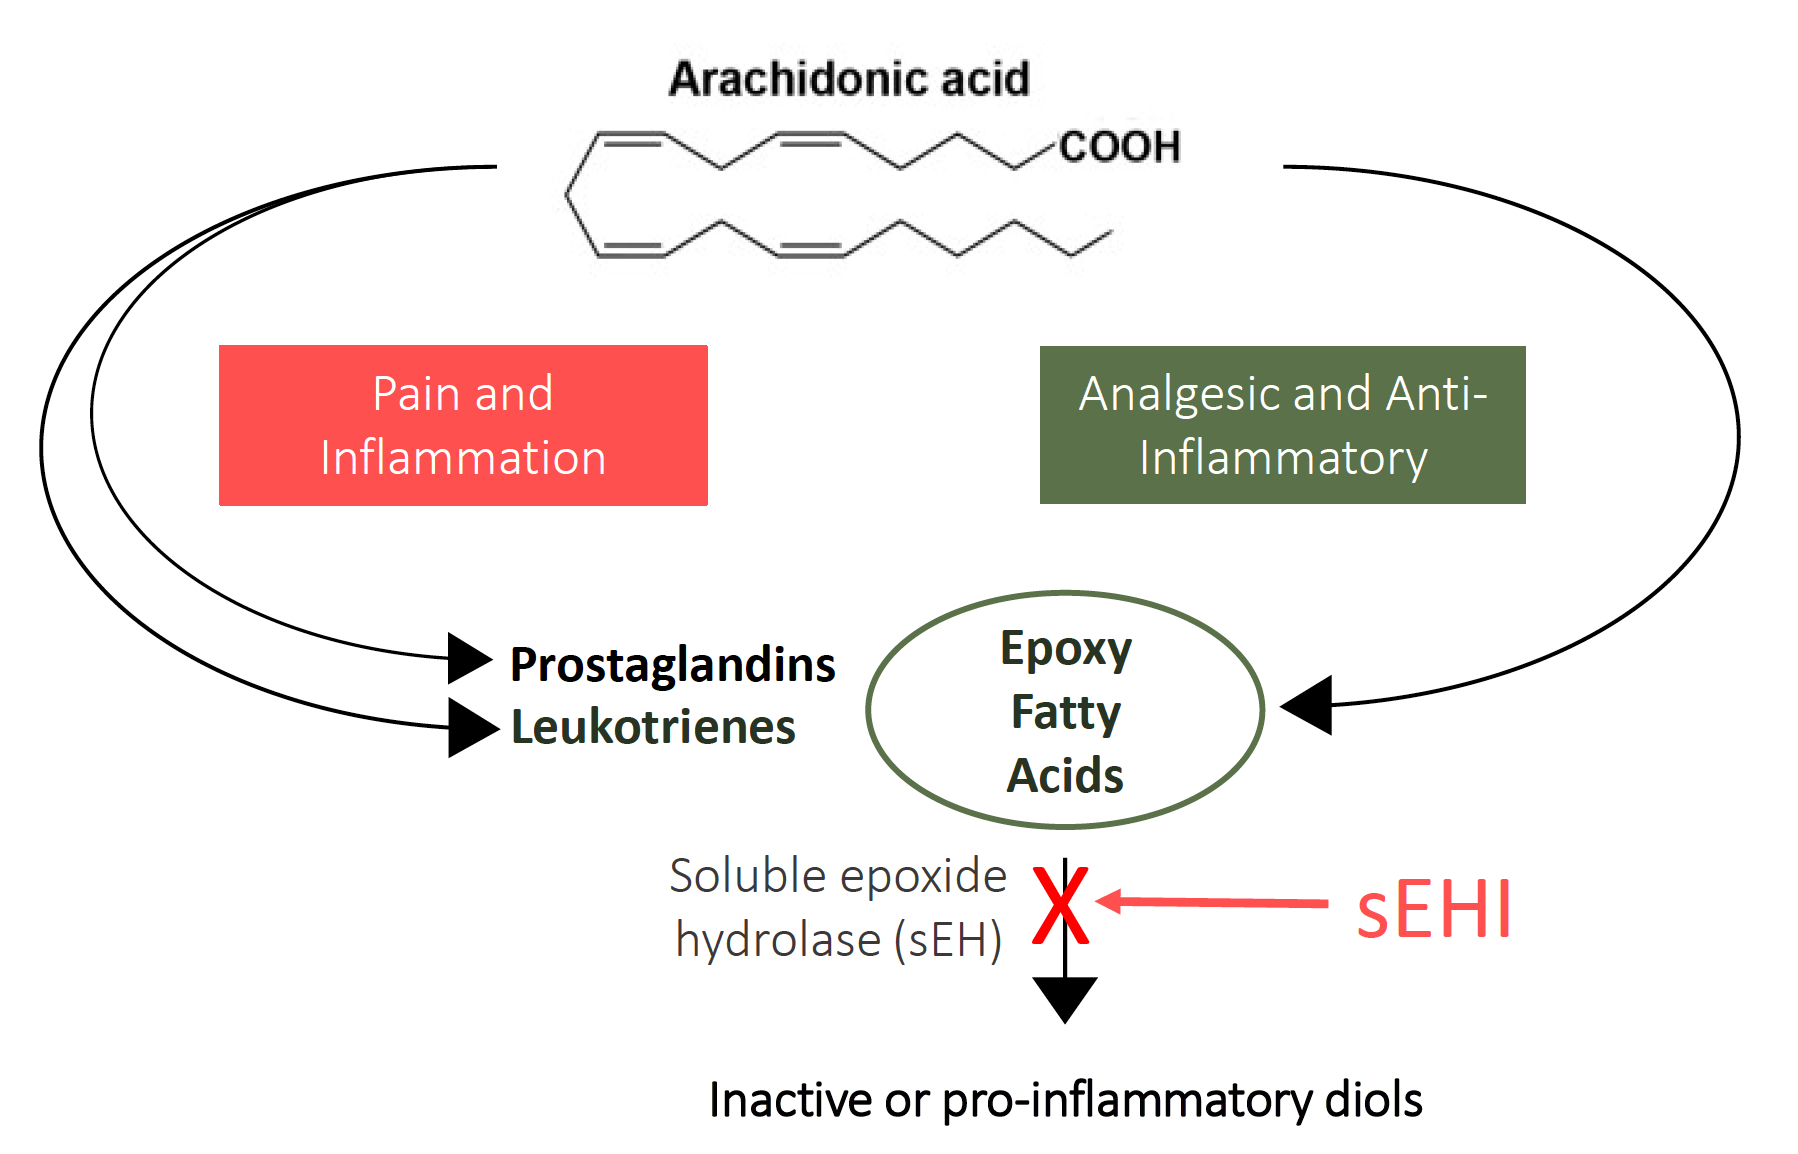 Metabolic pathway from arachidonic acid to the analgesic and anti-inflammatory epoxy-fatty acids. Epoxy fatty acids are then degraded by the sEH enzyme to potentially harmful diols. By inhibiting sEH enzyme we increase these naturally occurring analgesic and anti-inflammatory epoxy fatty acids